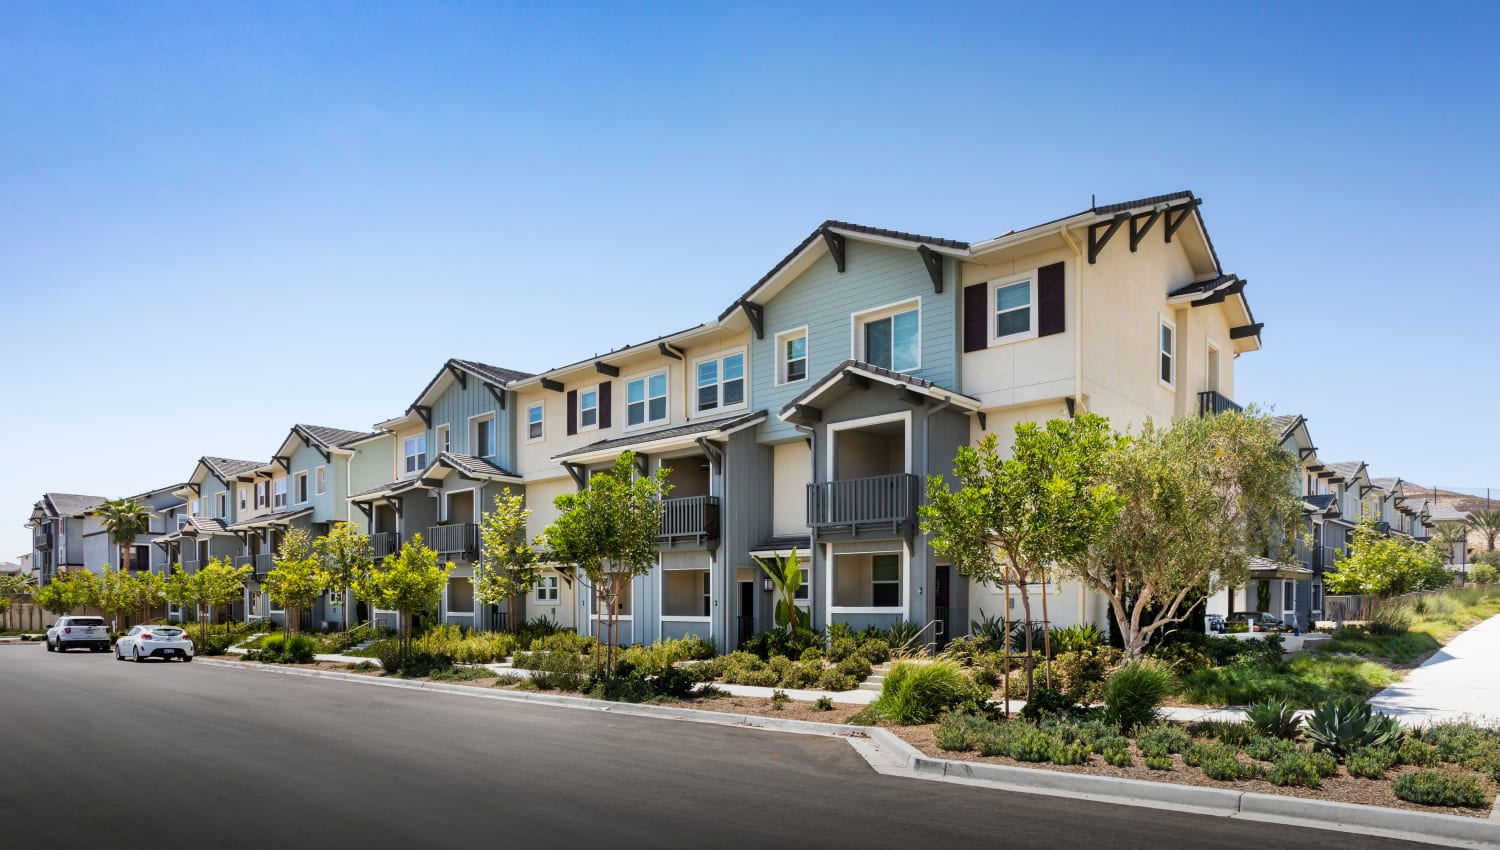 Exterior street view of The Residences at Escaya in Chula Vista, California